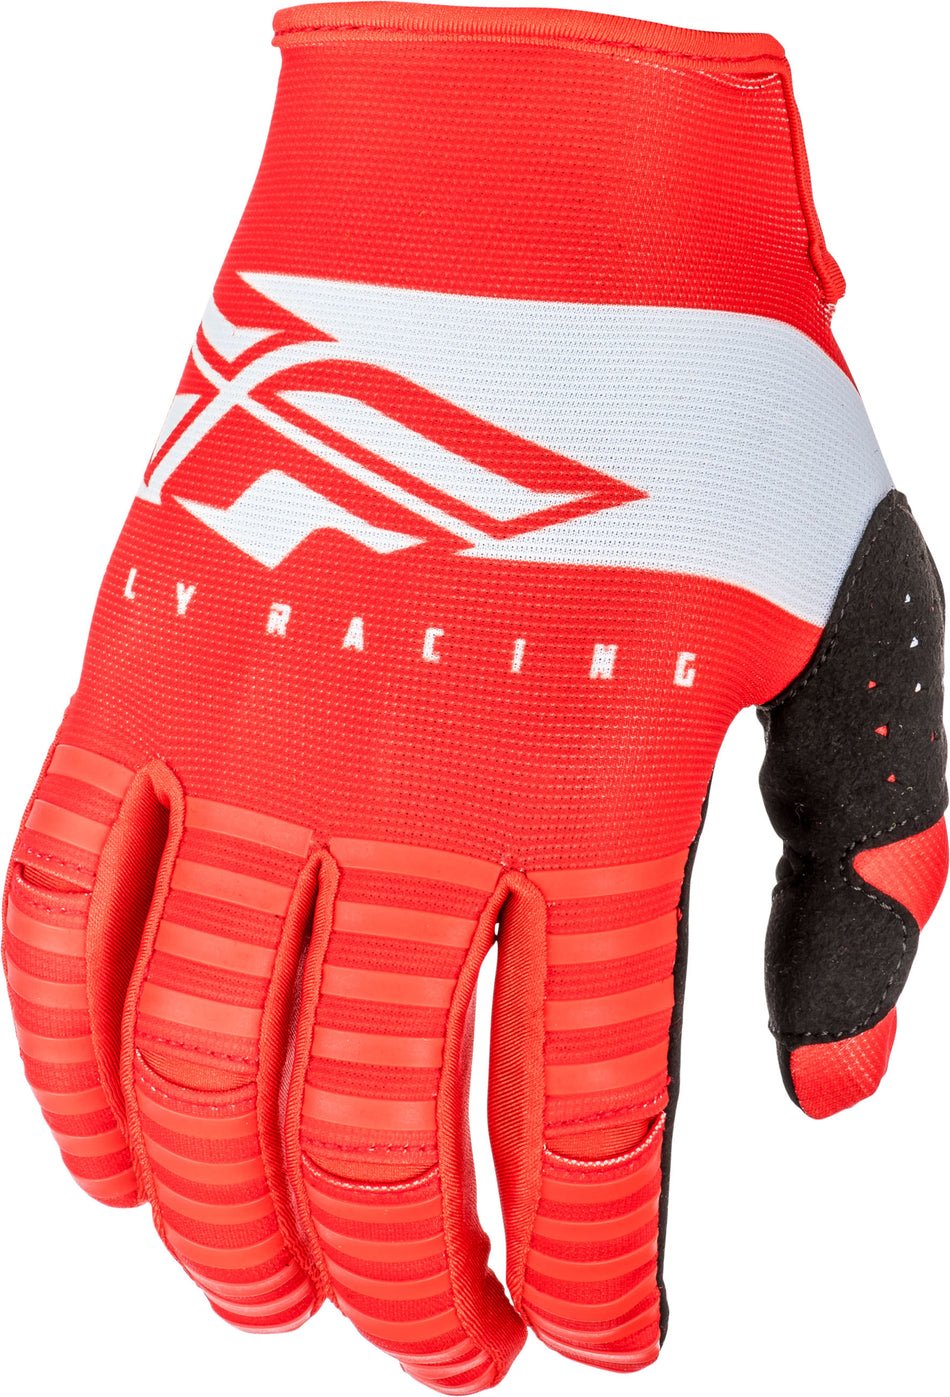 FLY RACING Kinetic Shield Gloves Red/White Sz 12 372-41212